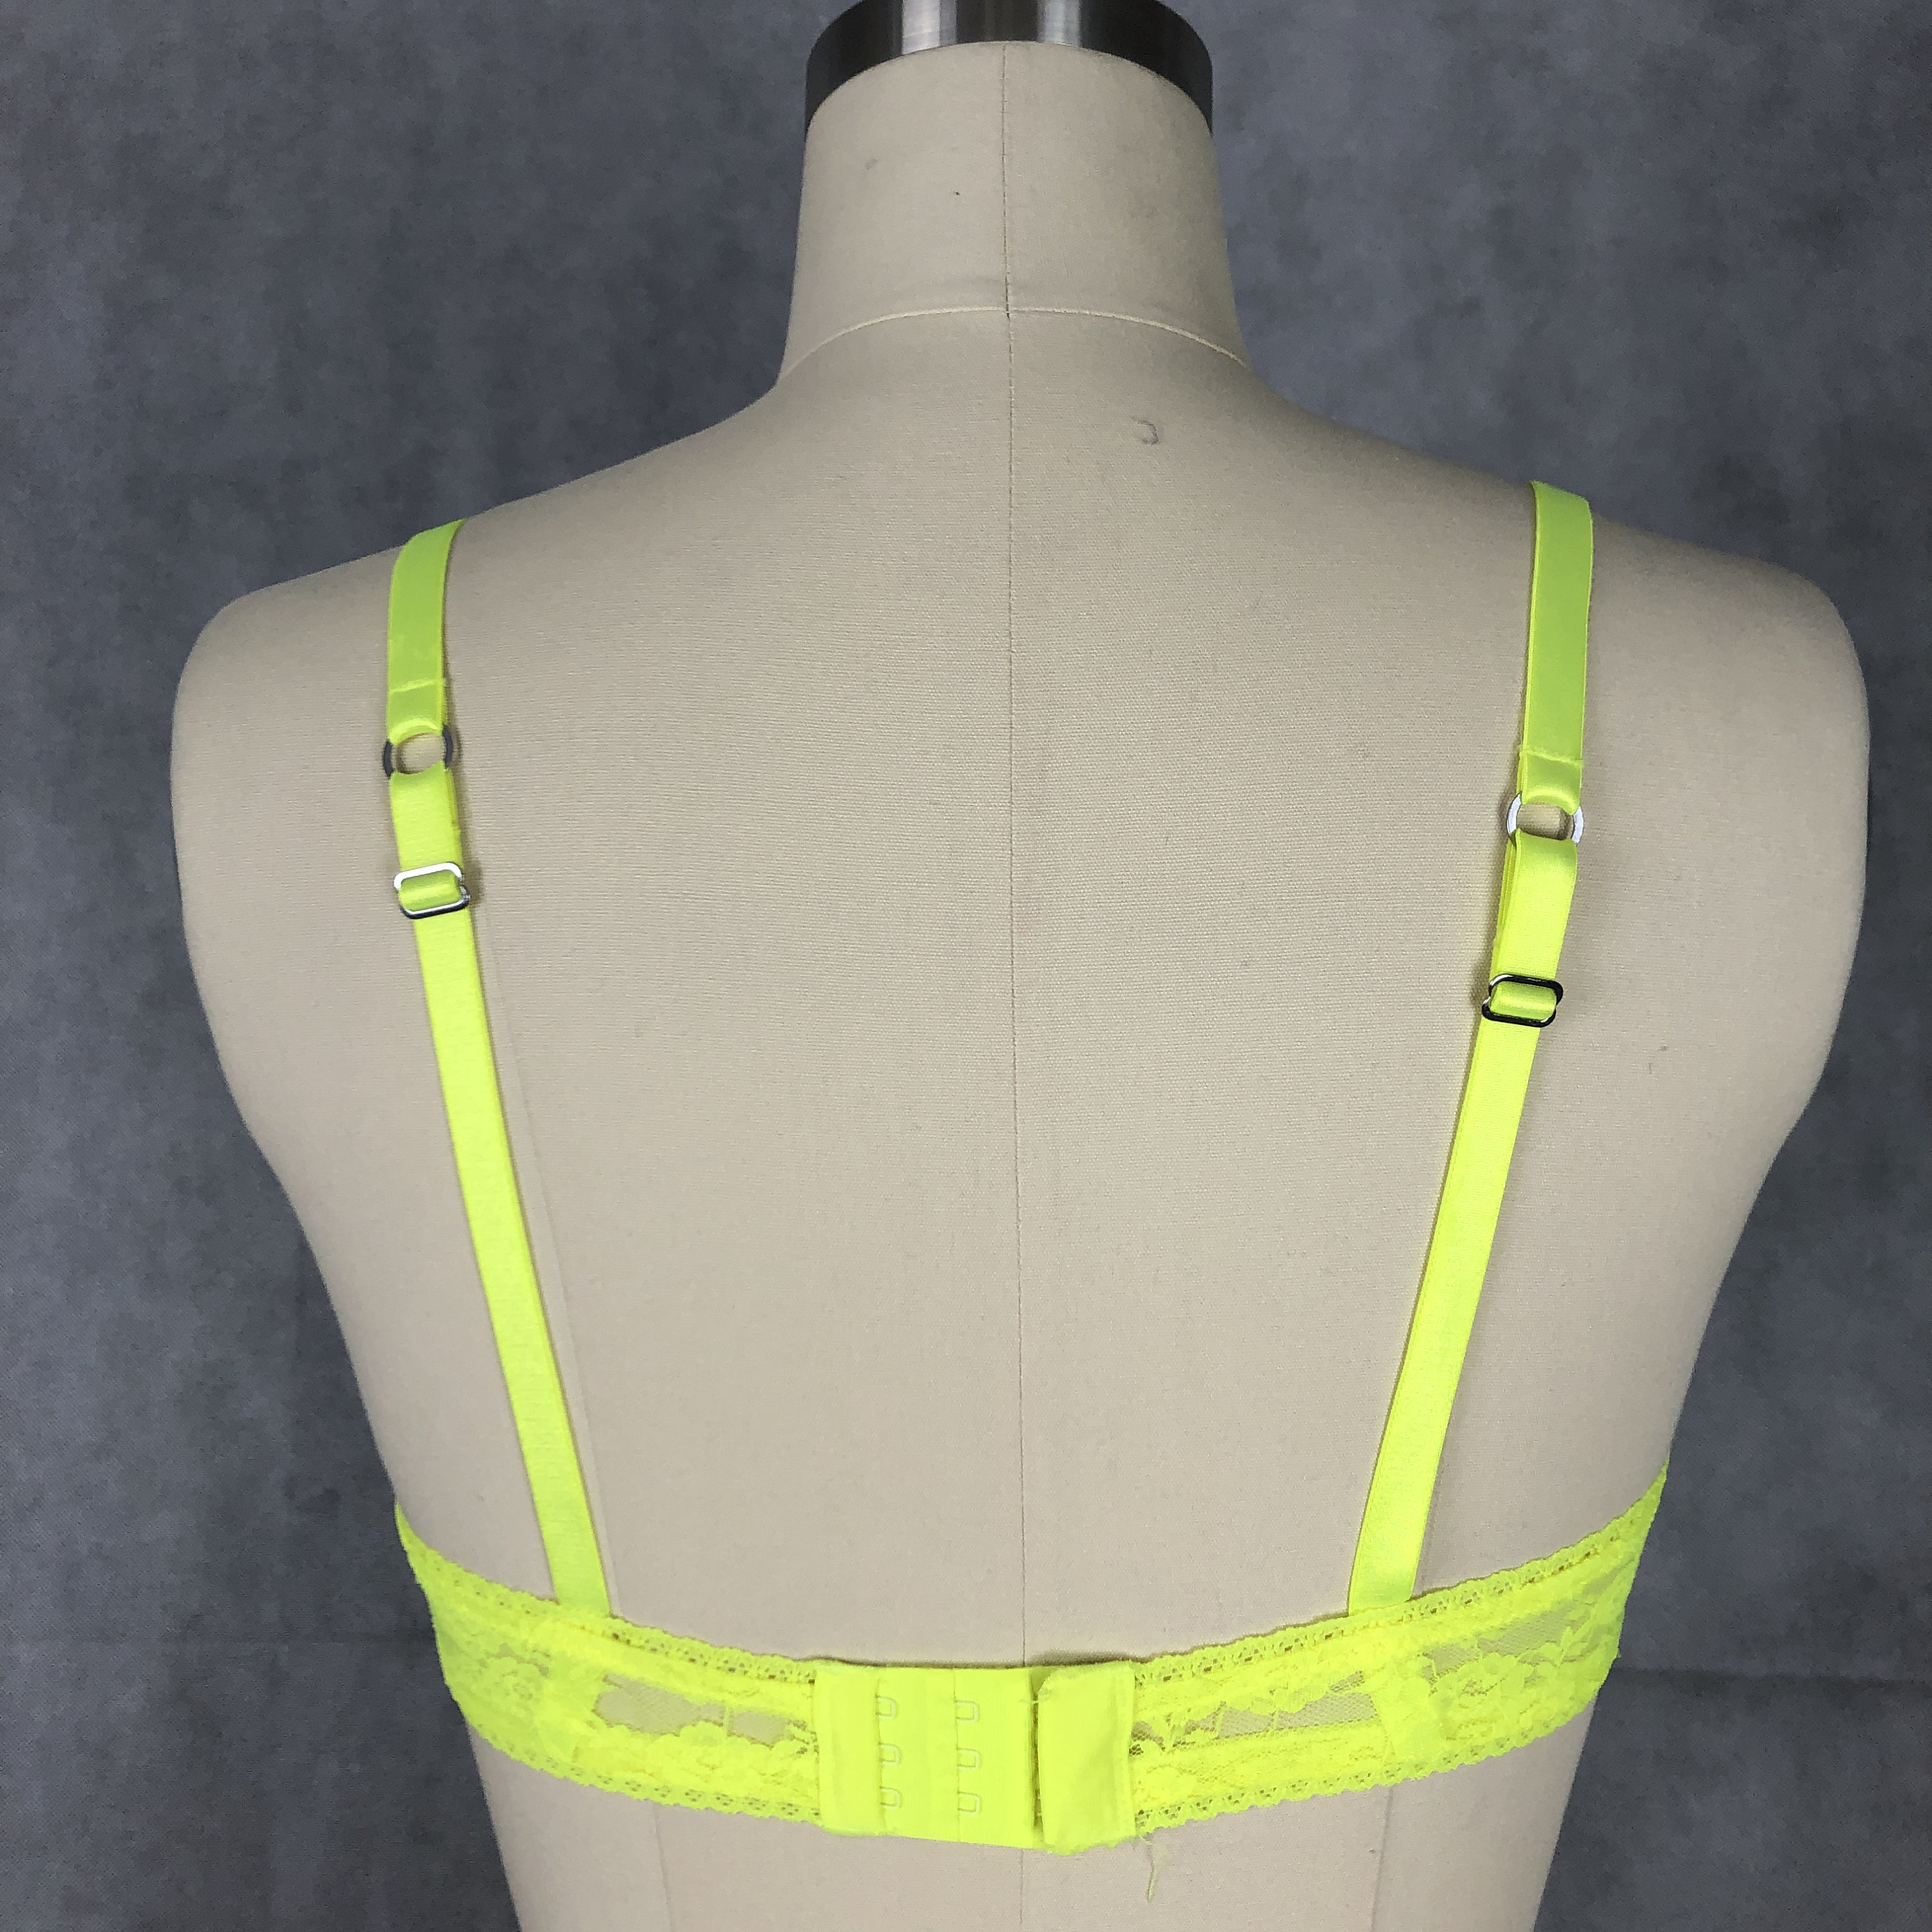 Buy Neon Yellow Padded Bra to Be Worn Under or Over Your Favorite